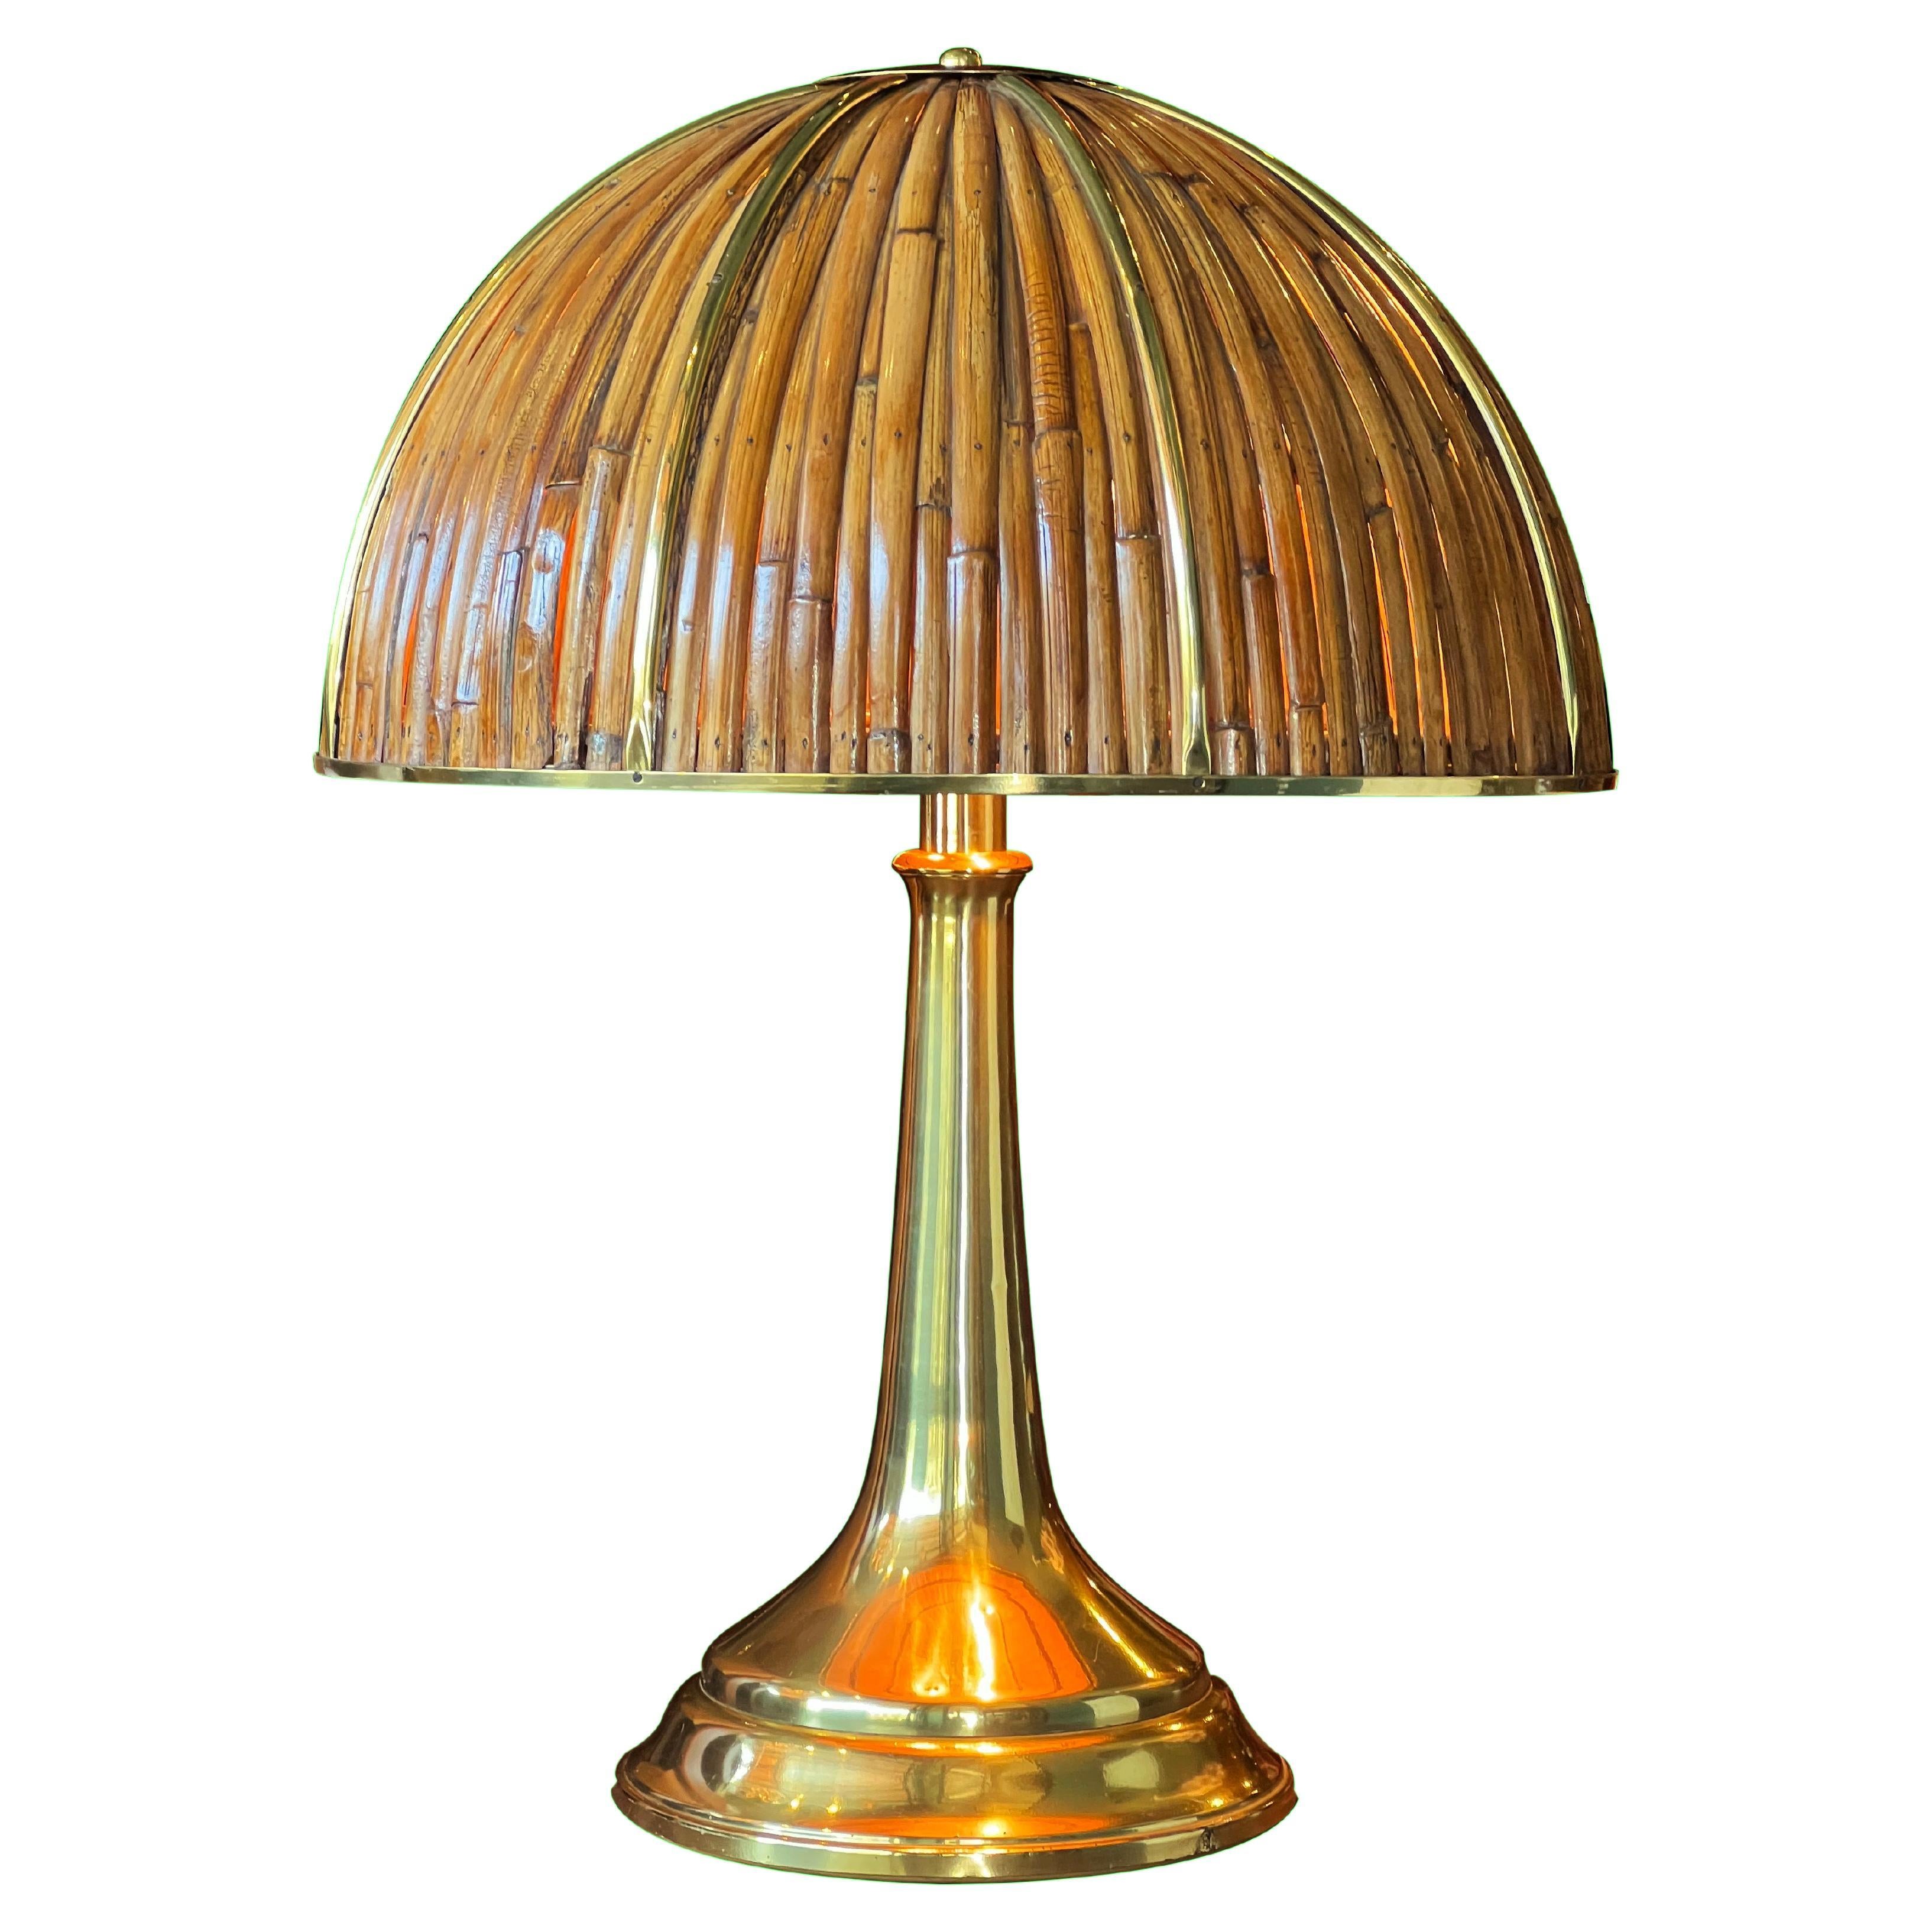 Gabriella Crespi Large Fungo Table Lamp, Rising Sun Series, 1973, Italy For Sale